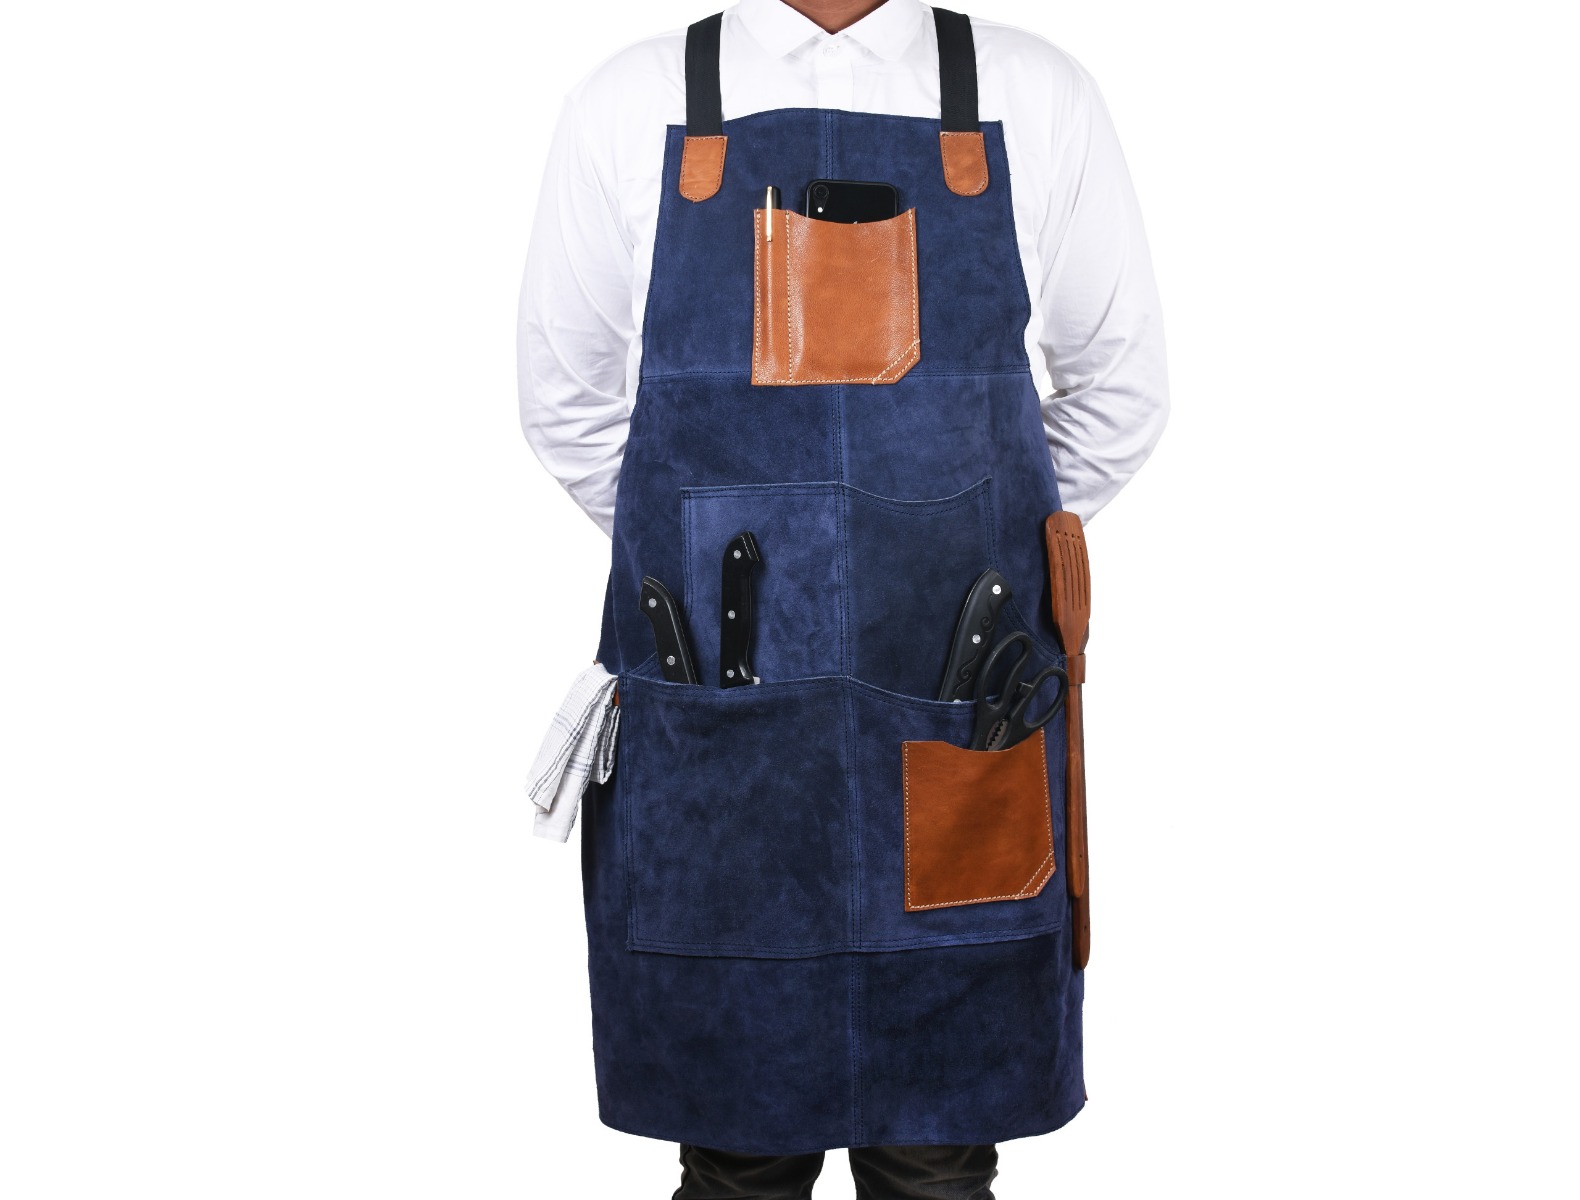 What is leather Aprons?